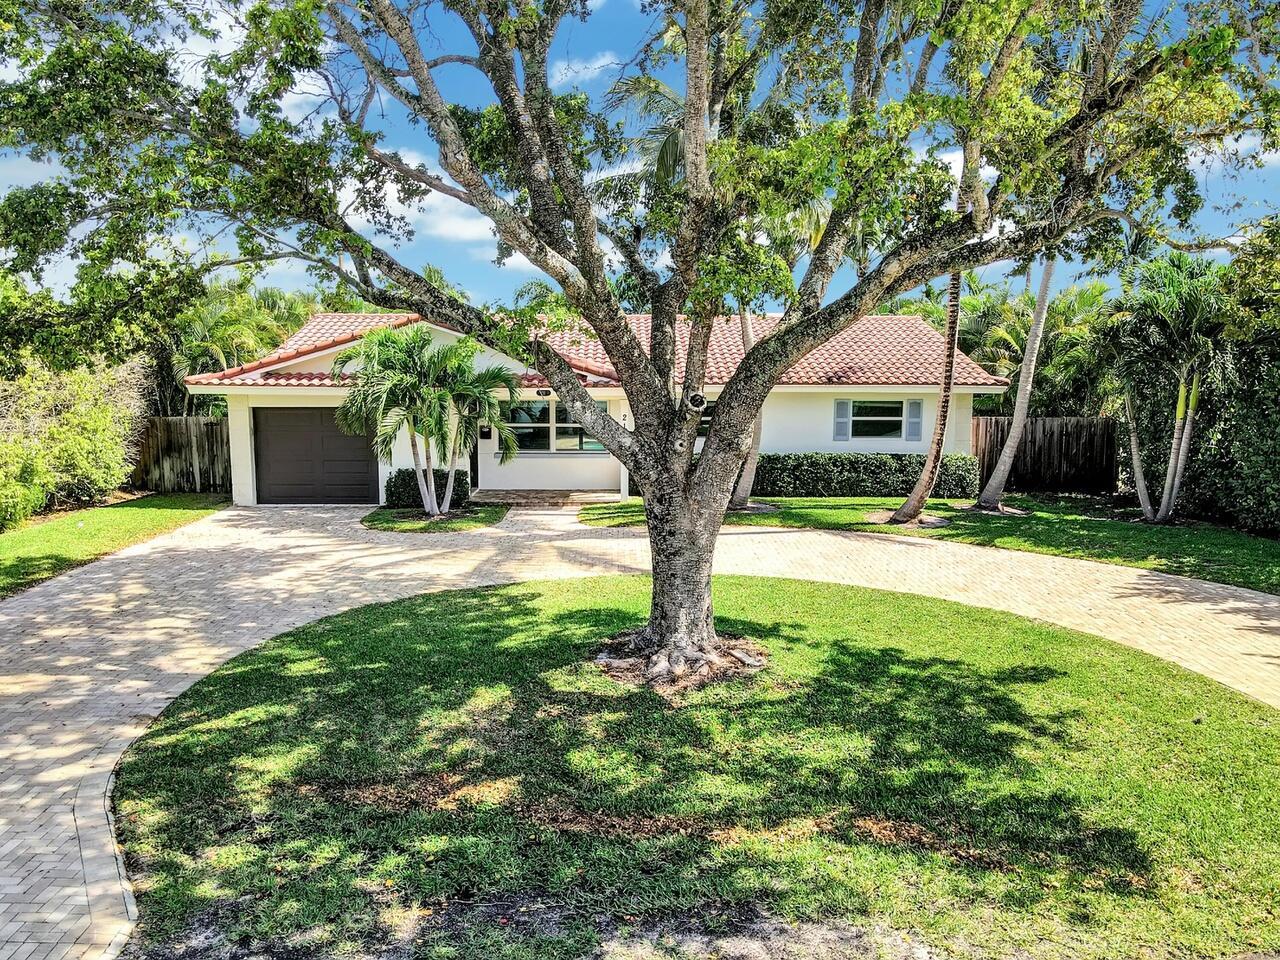 Conveniently located in one of the best sections of the neighborhood. This home has recently undergone a complete renovation and sits on an oversized lot in East Delray Beach's popular Lake Ida neighborhood. The plan includes three bedrooms, two baths, a large pool and pool deck and a one-car garage. Renovations included new Impact windows, kitchen cabinets, countertops and appliances, new marble in Master Bath, new porcelain plank tile throughout, new impact resistant windows and doors, and new pavers at driveway and pool deck. New AC Installed in December 2023